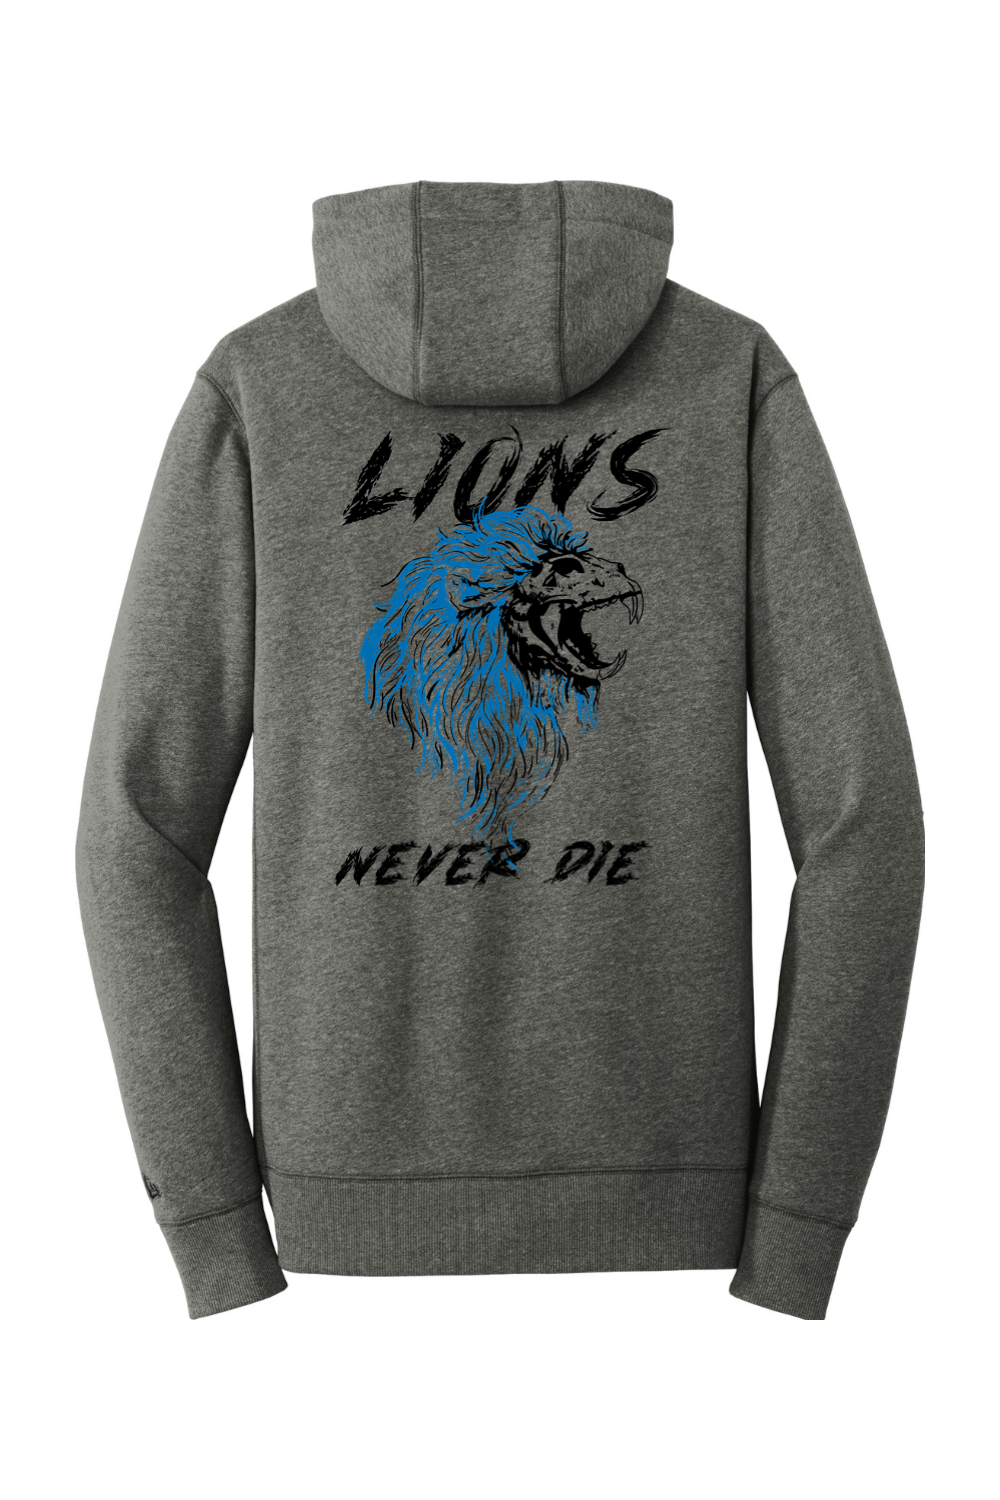 Lions Never Die - New Era French Terry Hoodie